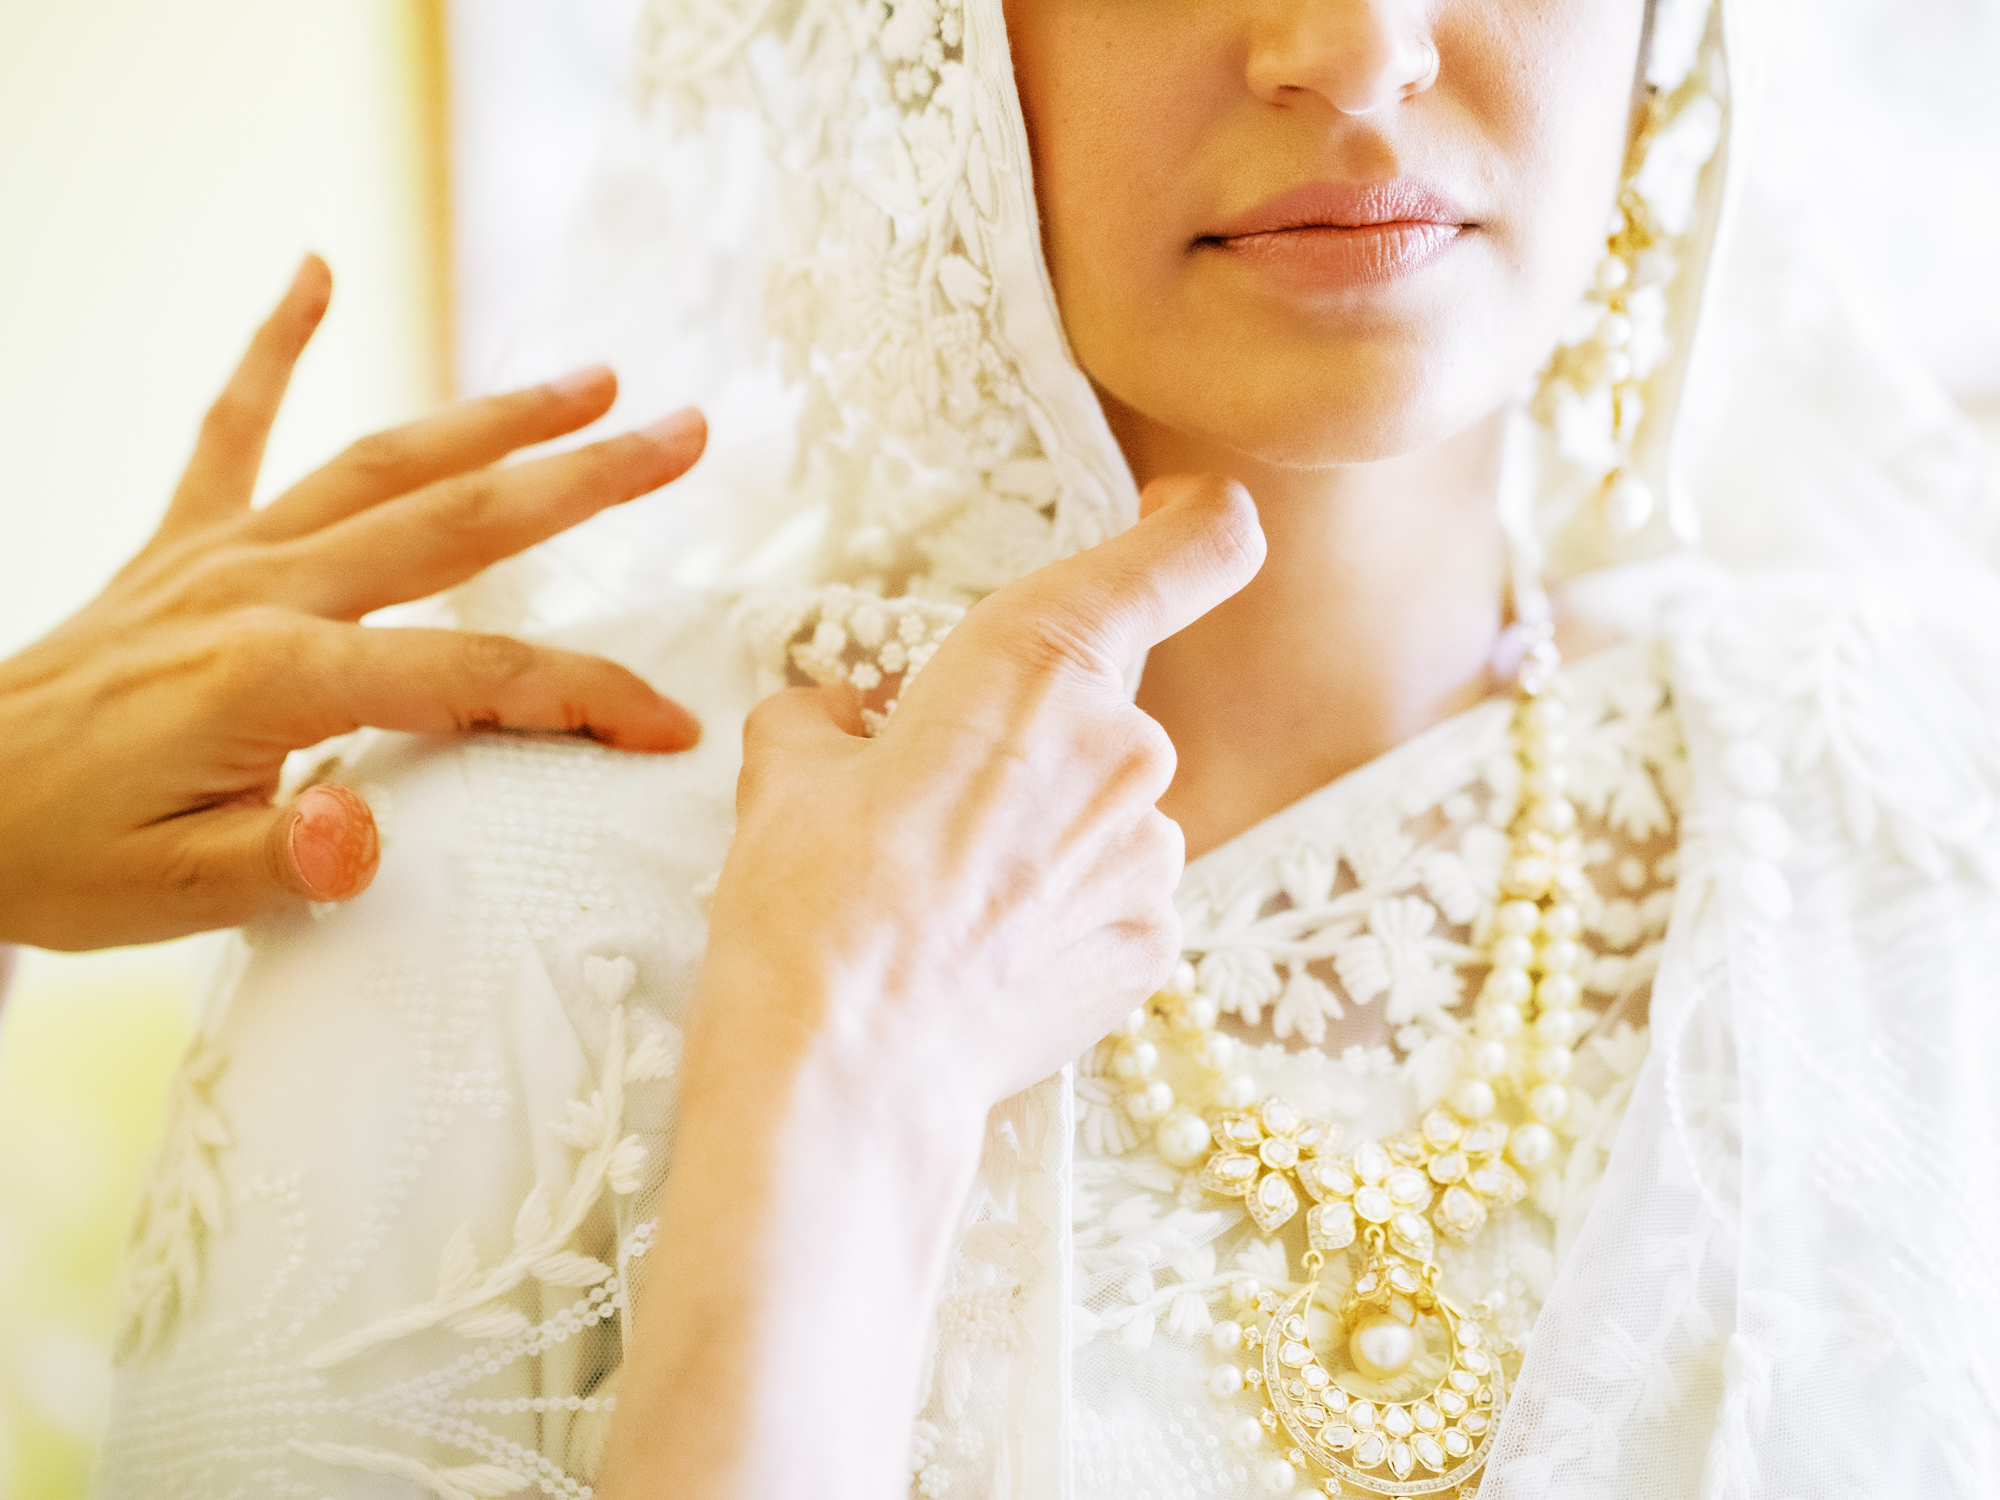 Seattle Indian Muslim wedding photographer: Ateqah getting ready for Nikkah